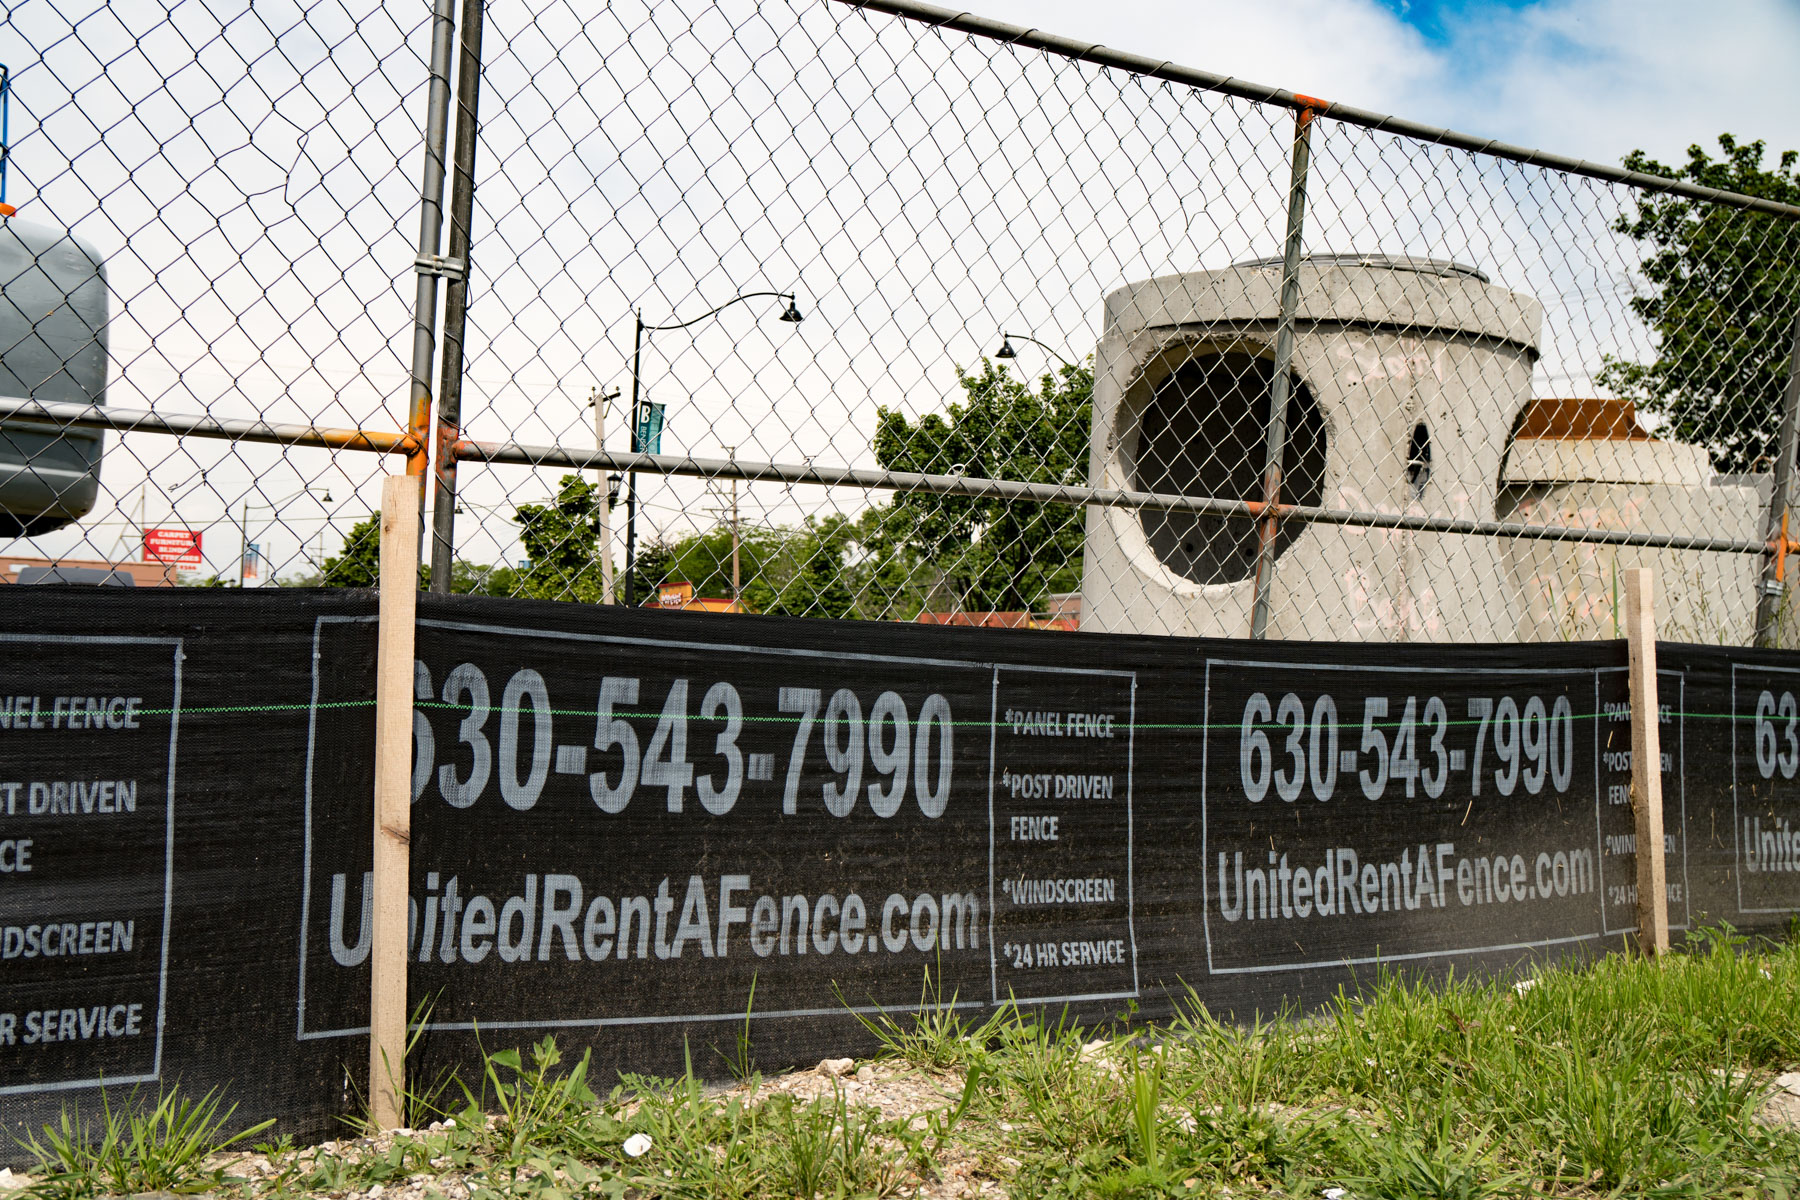 Silt Fence Company in Bensenville, IL